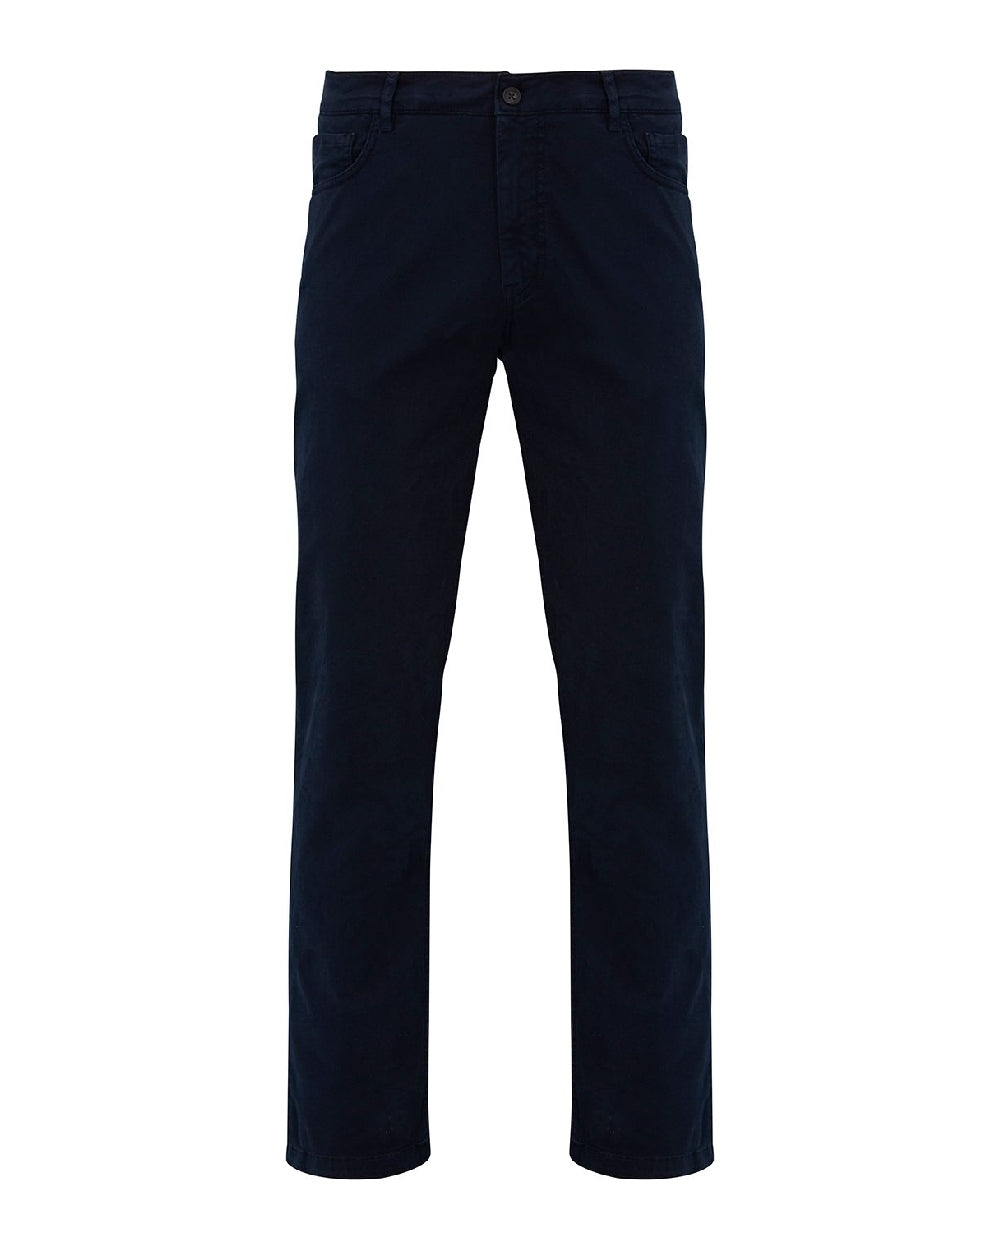 Alan Paine Mens Cheltham Chino Jeans